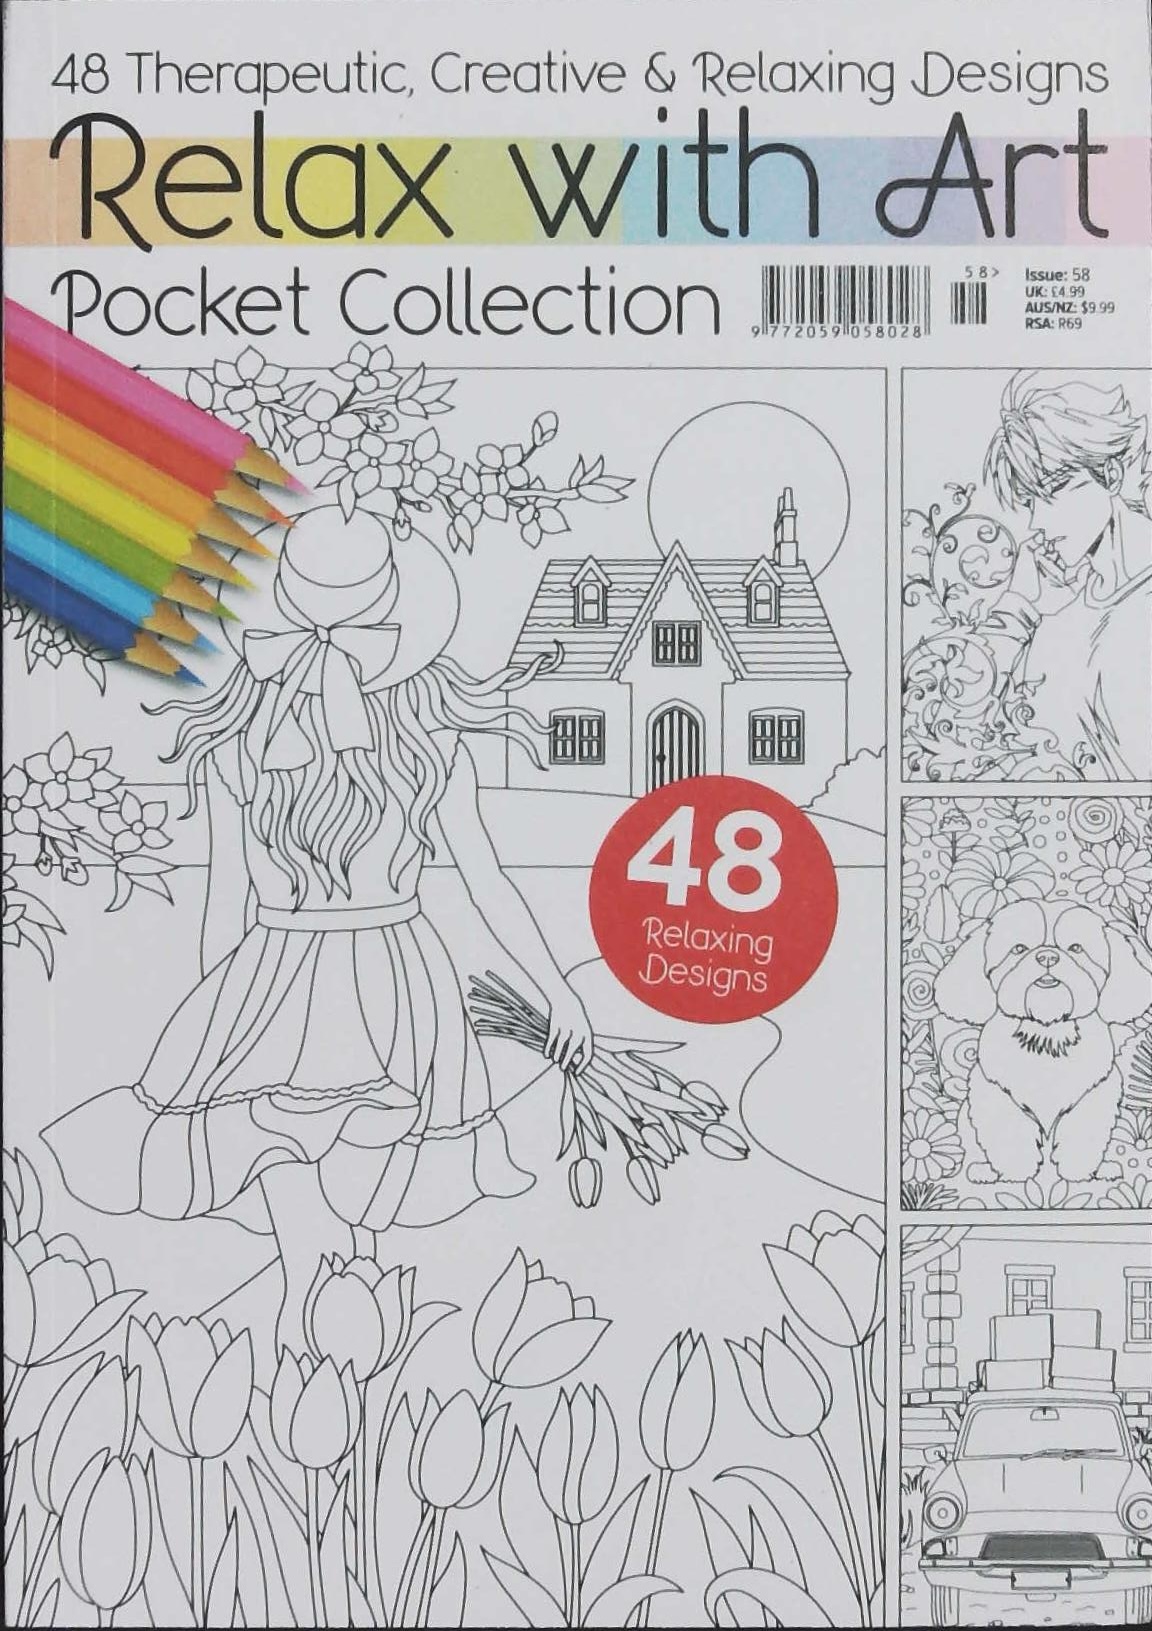 RELAX WITH ART POCKET COLL